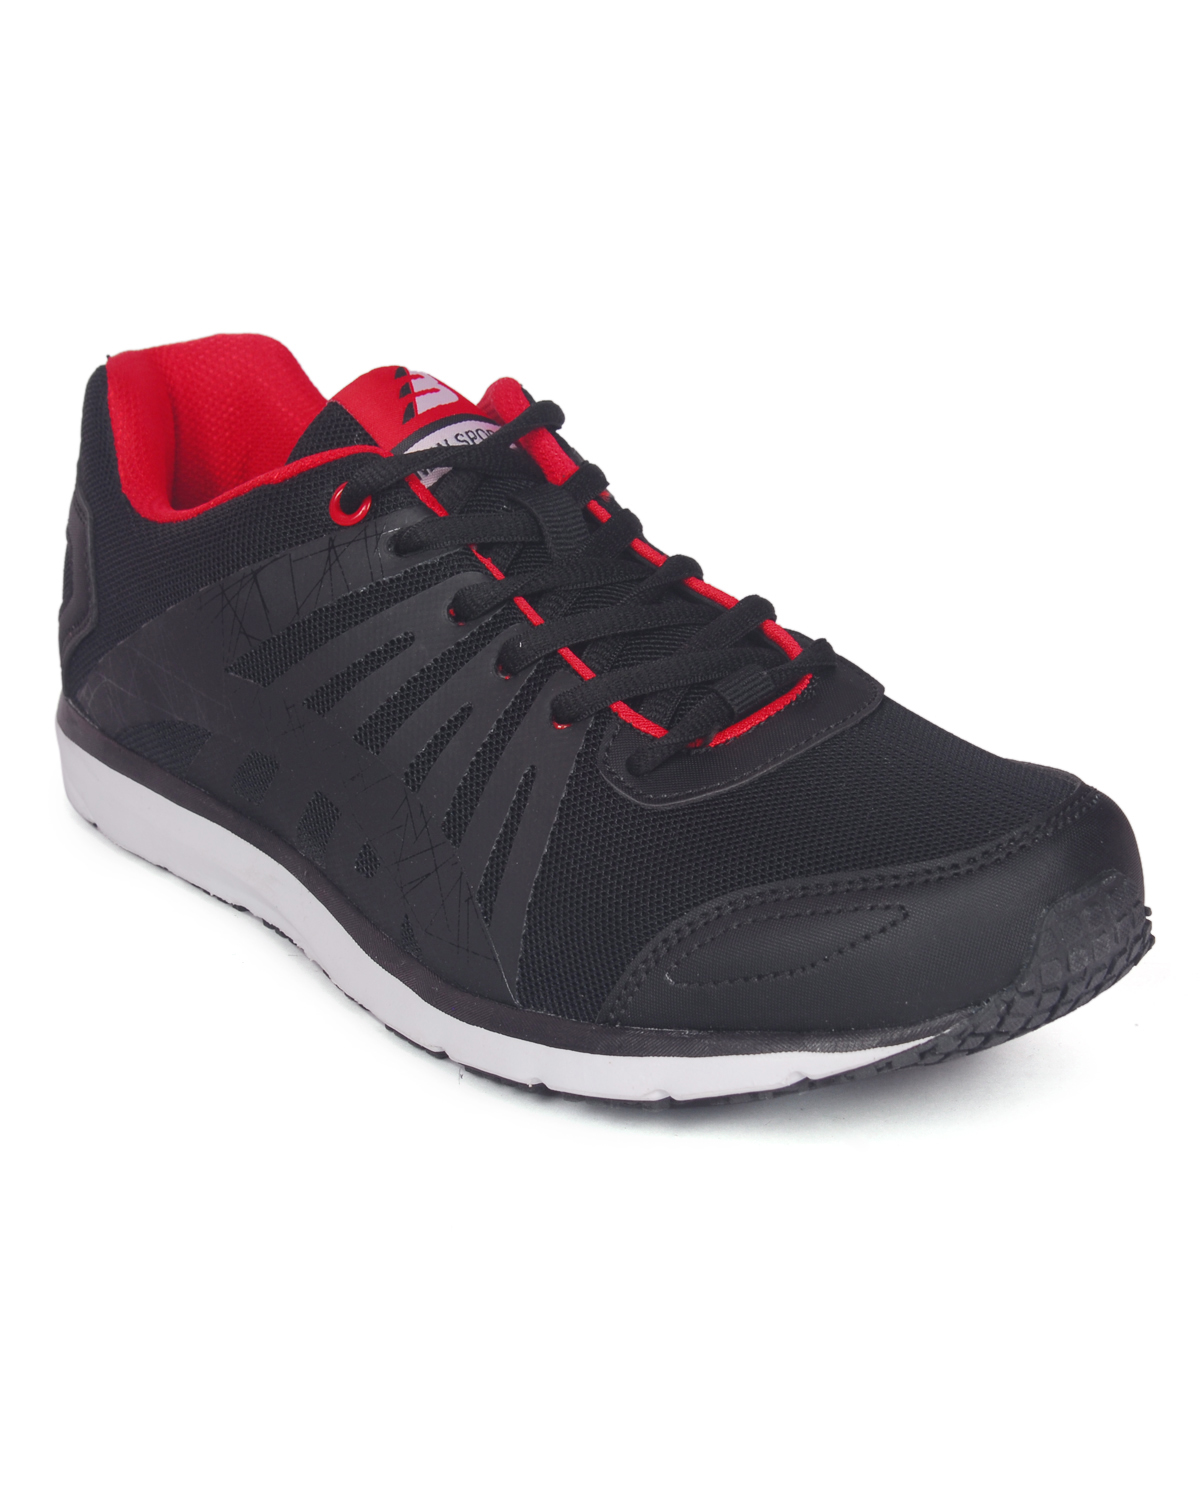 Buy lotus bawa sports shoes for mens black Online @ ₹1857 from ShopClues